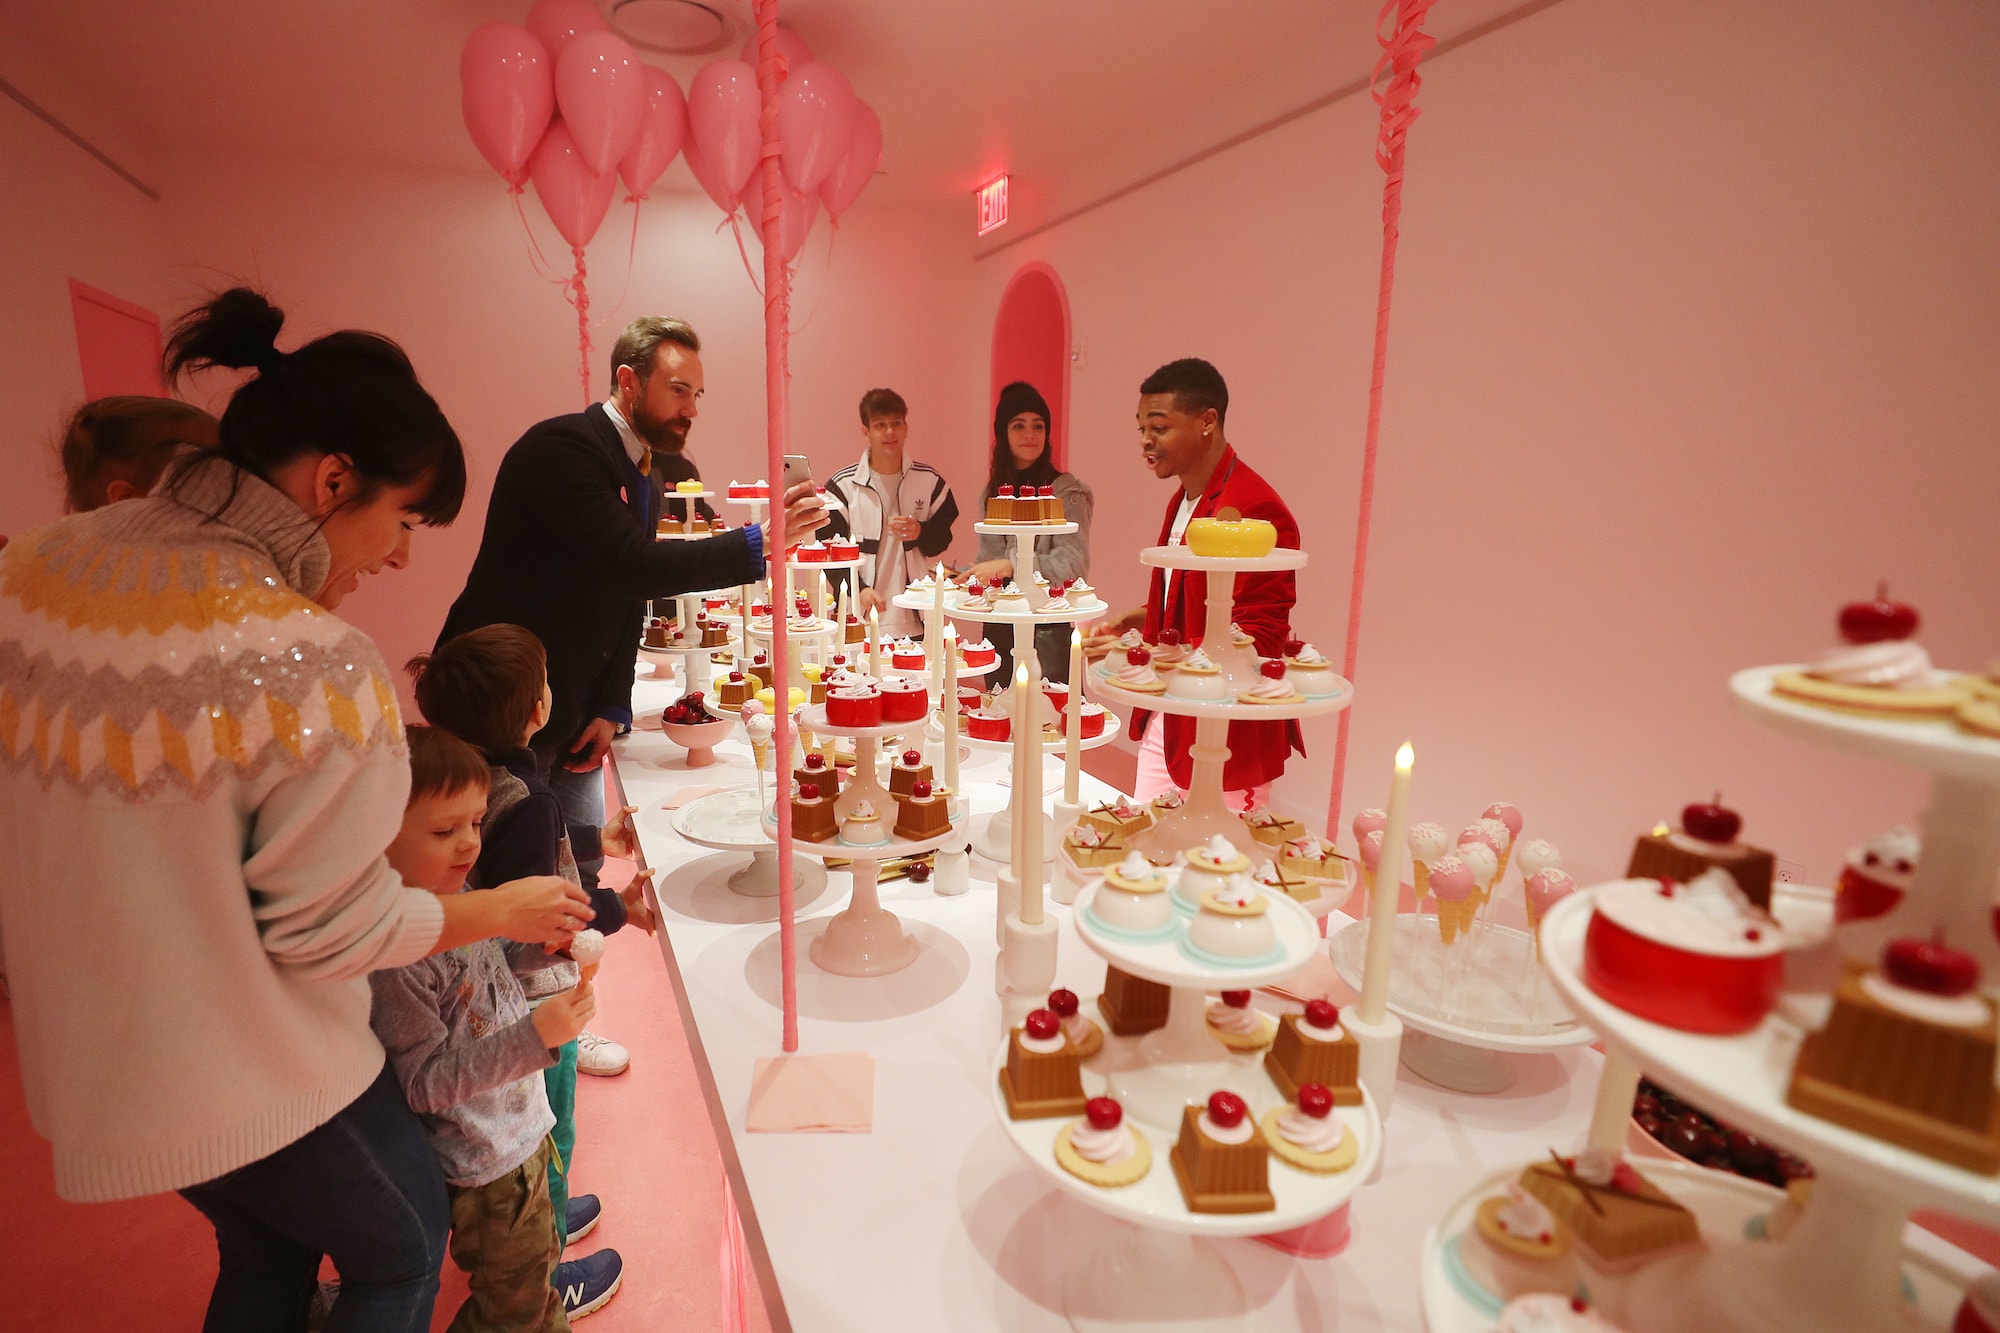 Museum of Ice Cream New York Opening Tickets Installation Art Travel NYC Information First Look